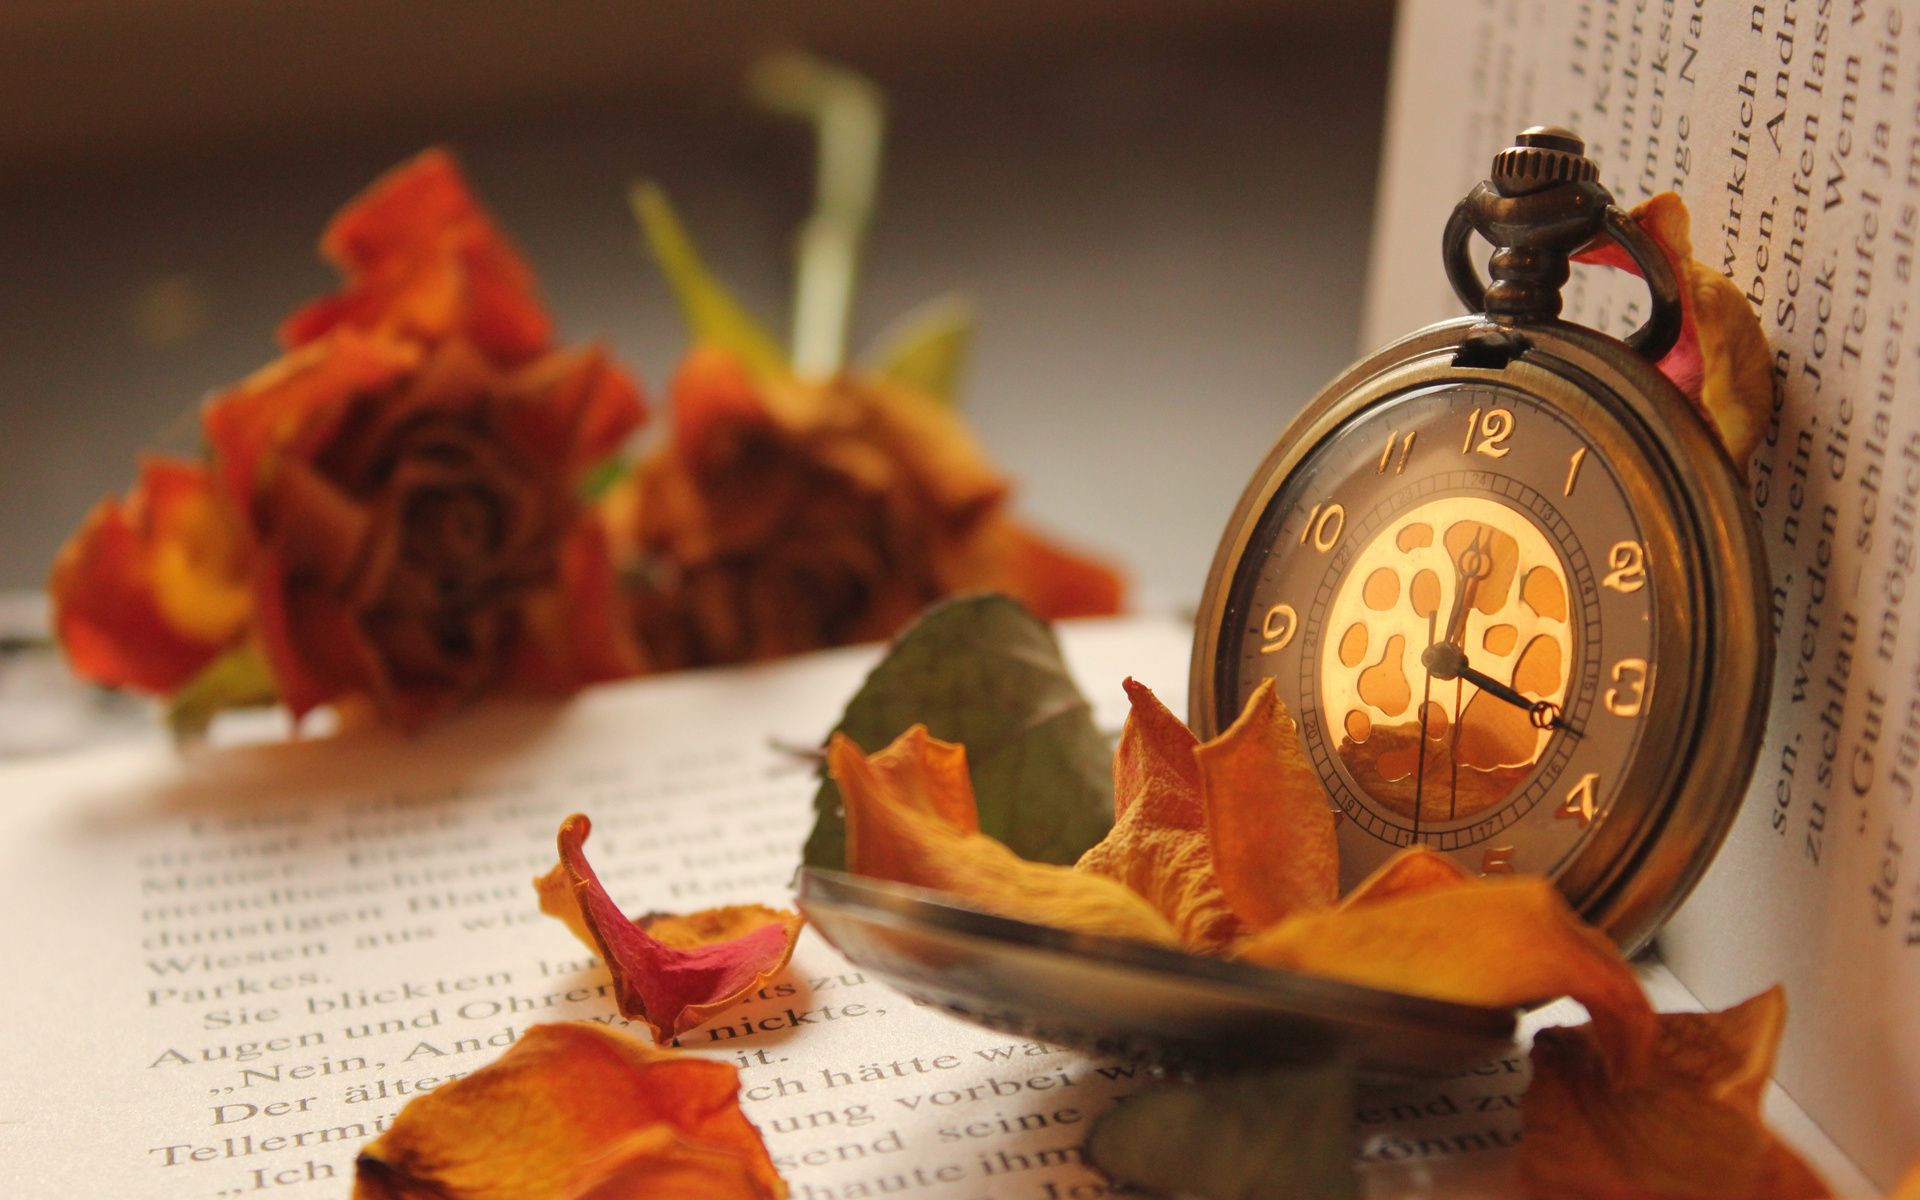 Flowers, Watch, Pocket, Rose, Petals, Book And Books Time